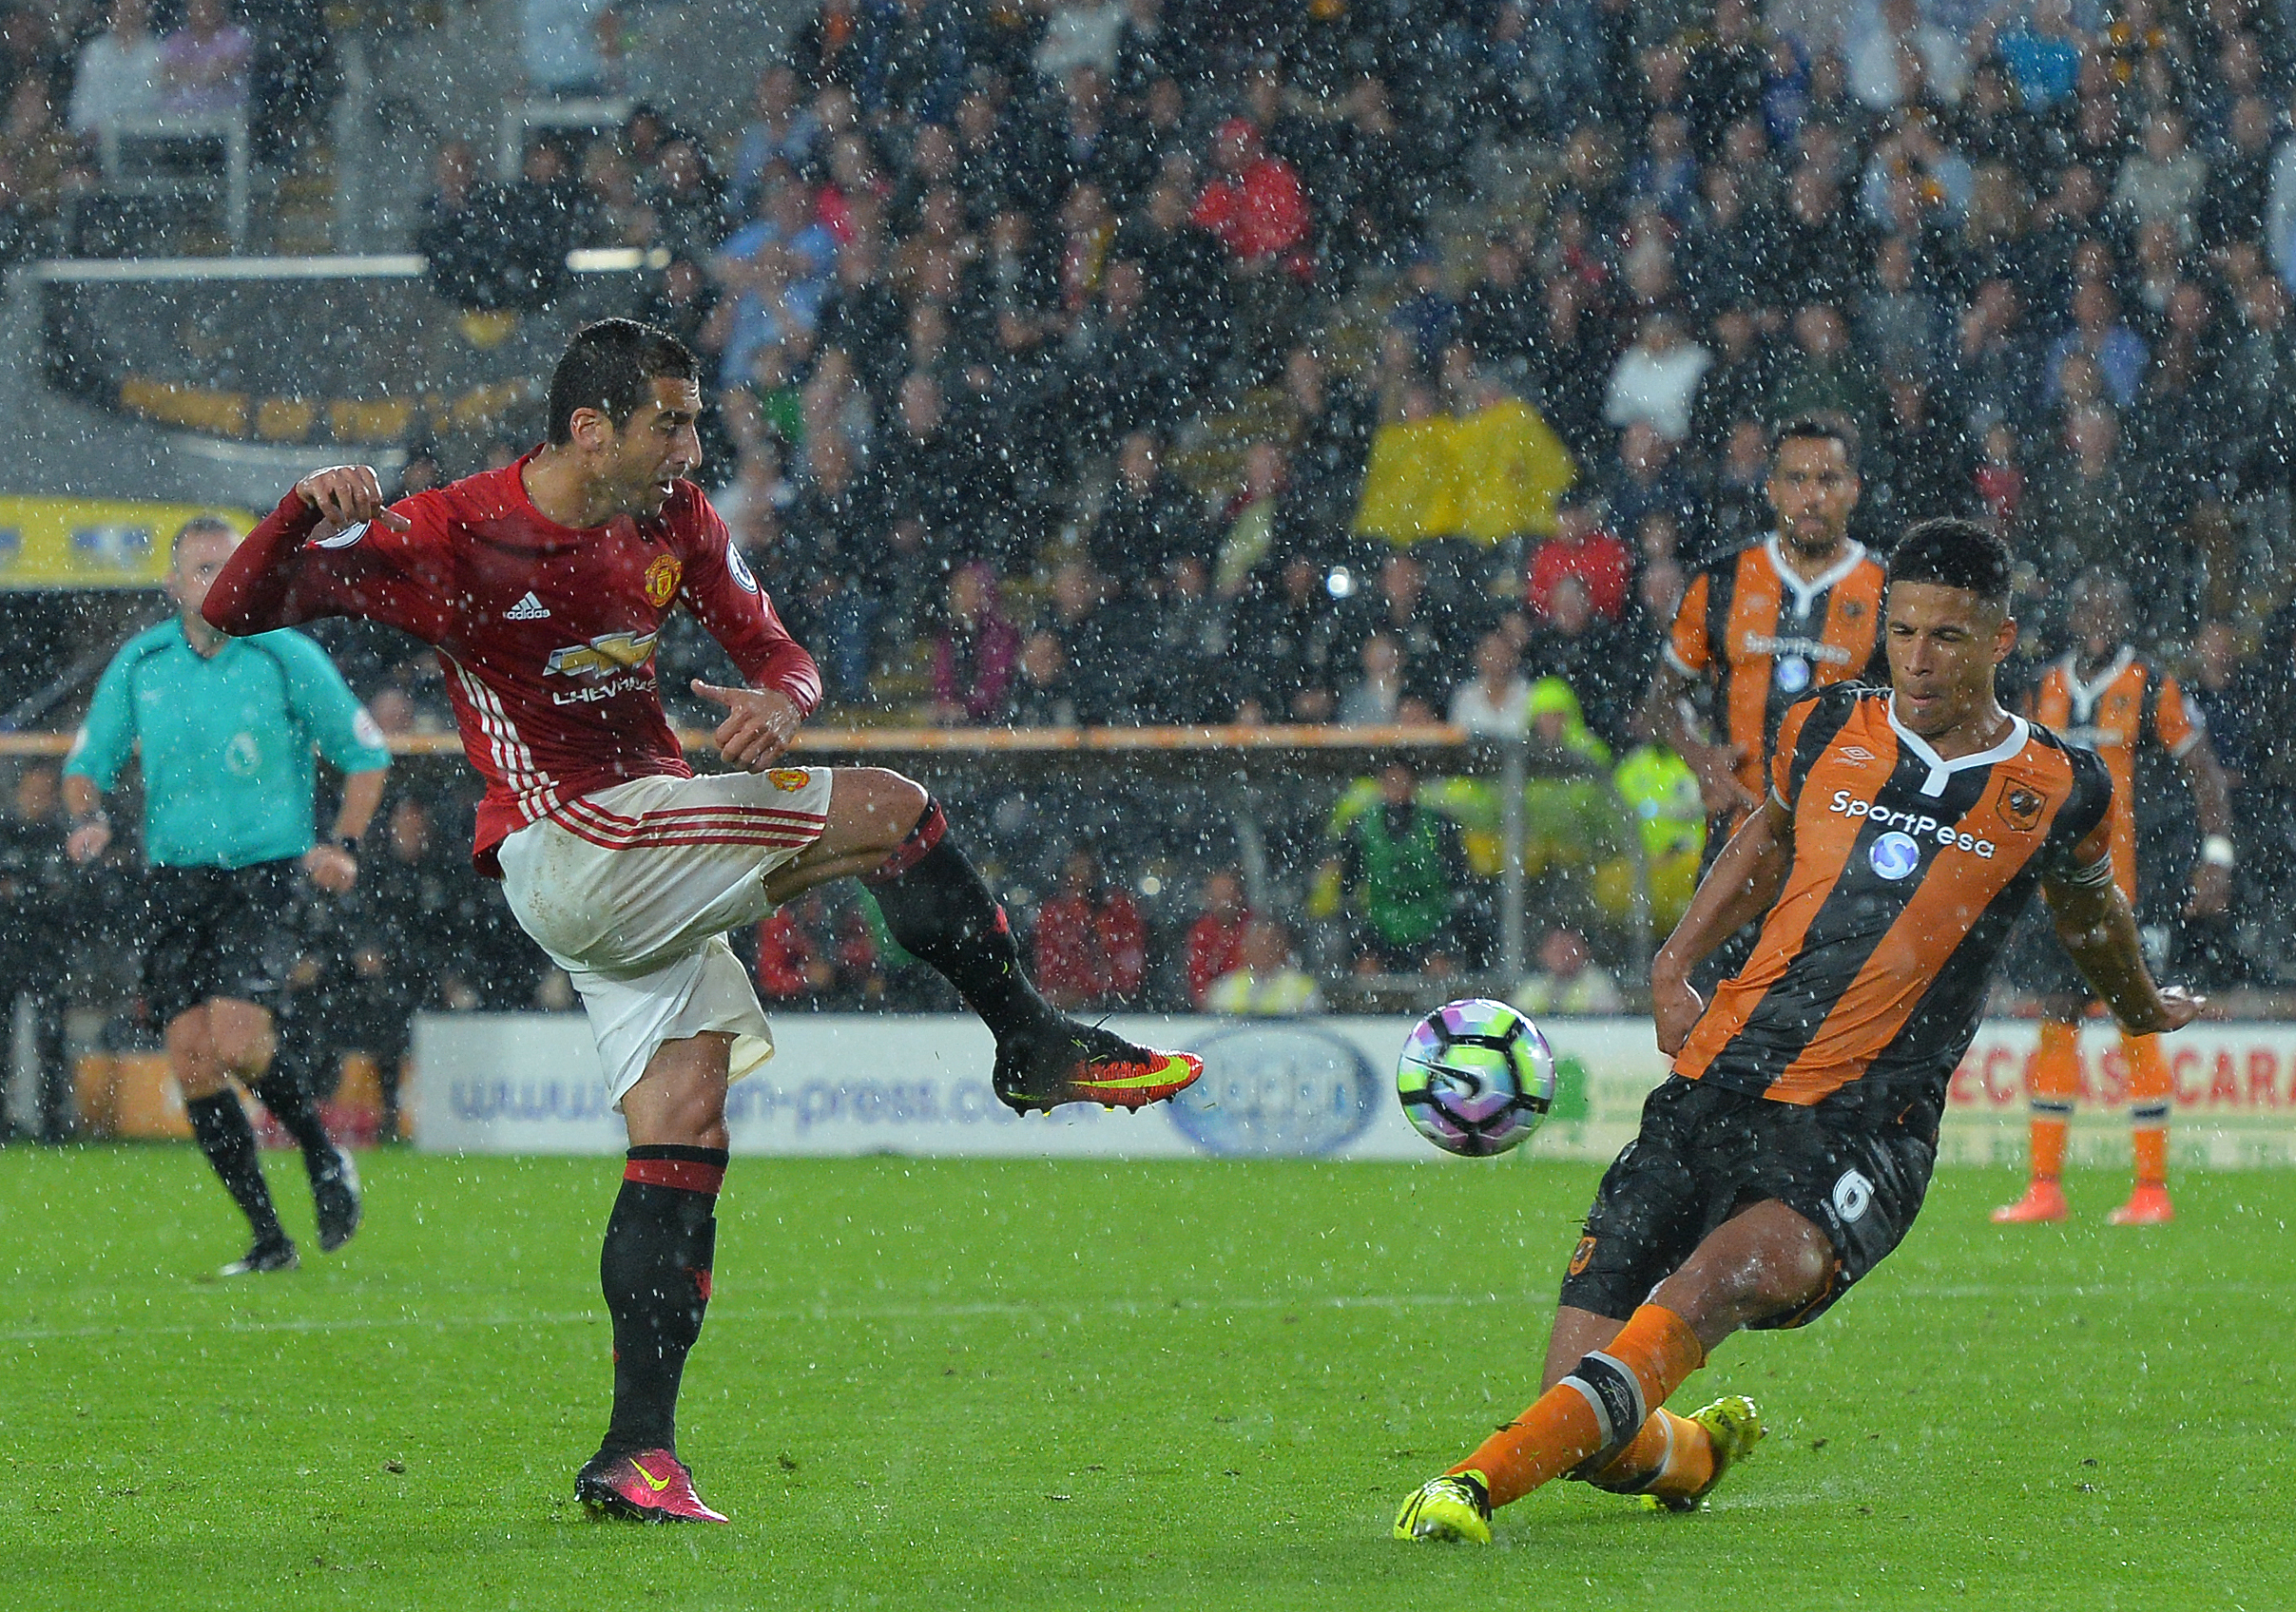 HULL, ENGLAND - AUGUST 27: Henrikh Mkhitaryan of Manchester United has his shot blocked by Curtis Davis of Hull City during the Premier League match between Manchester United FC and Hull City FC at KC Stadium on August 27, 2016 in Hull, England. (Photo by Mark Runnacles/Getty Images)